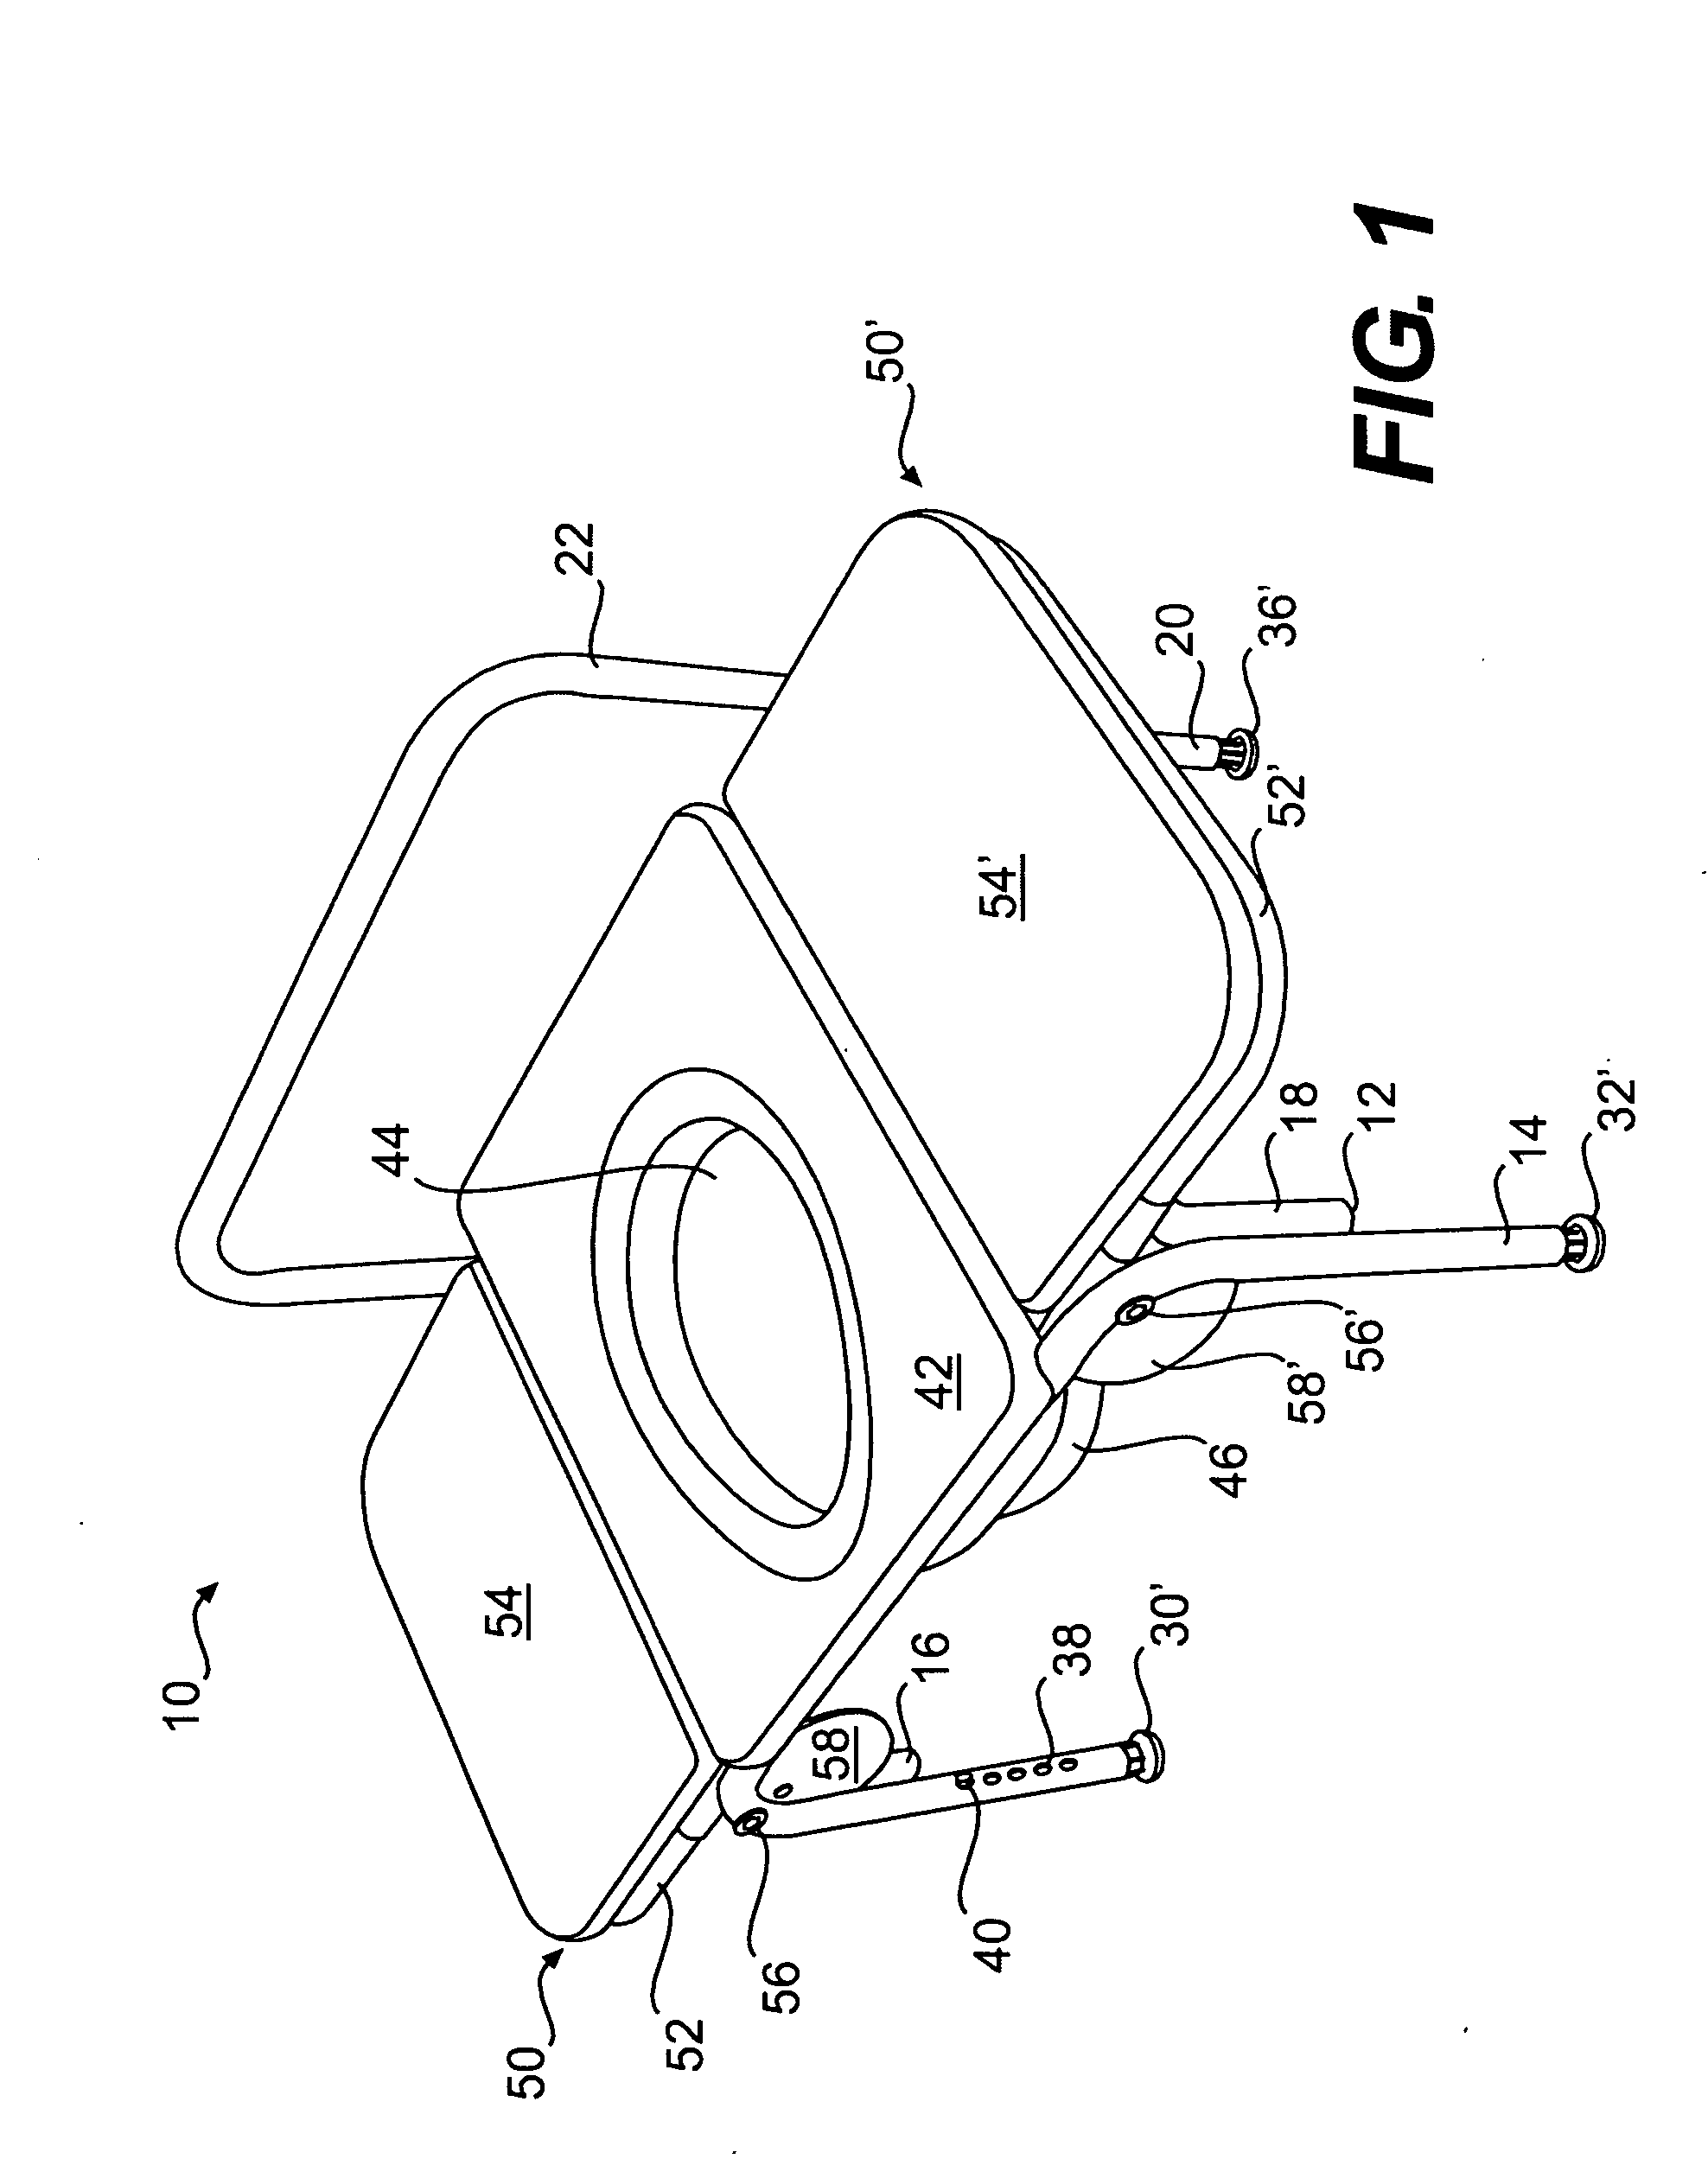 Transfer seat with rotatable wing